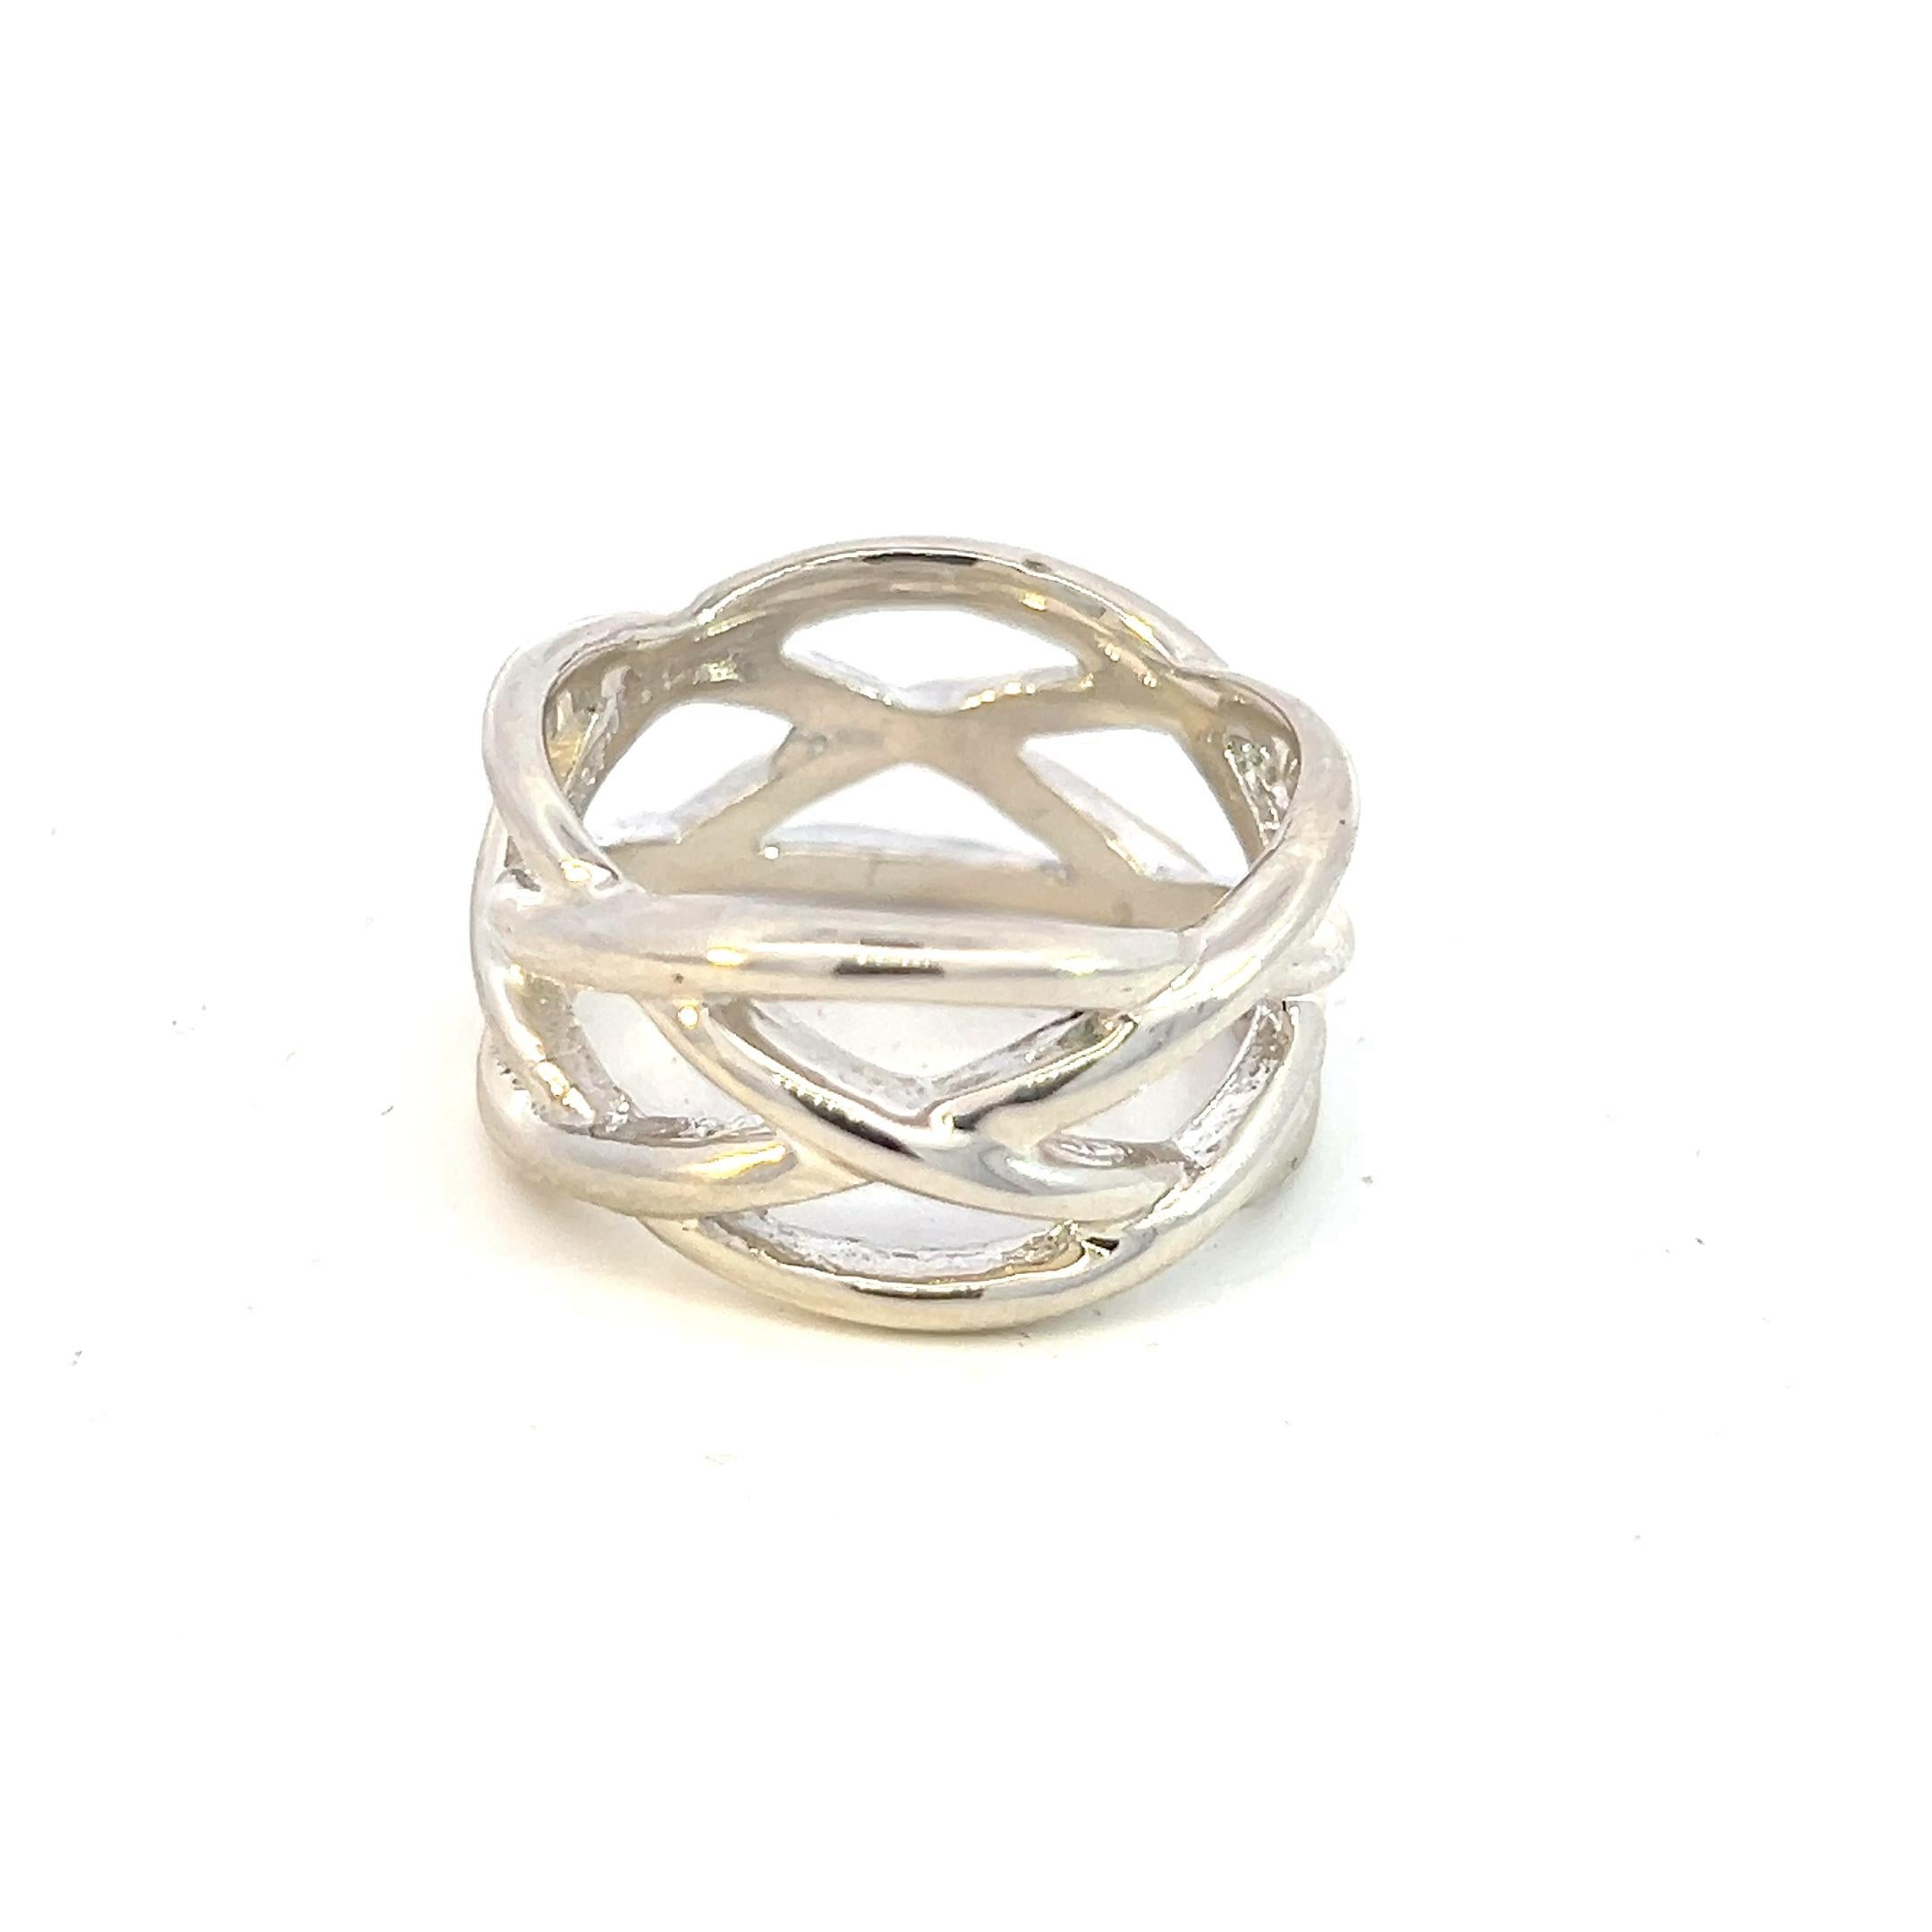 Authentic Tiffany & Co Estate Celtic Knot Ring Size 10 Sterling Silver 12 mm TIF565

TRUSTED SELLER SINCE 2002

PLEASE SEE OUR HUNDREDS OF POSITIVE FEEDBACKS FROM OUR CLIENTS!!

FREE SHIPPING

DETAILS
Style: Celtic Knot
Ring Size: 10
Length: 12